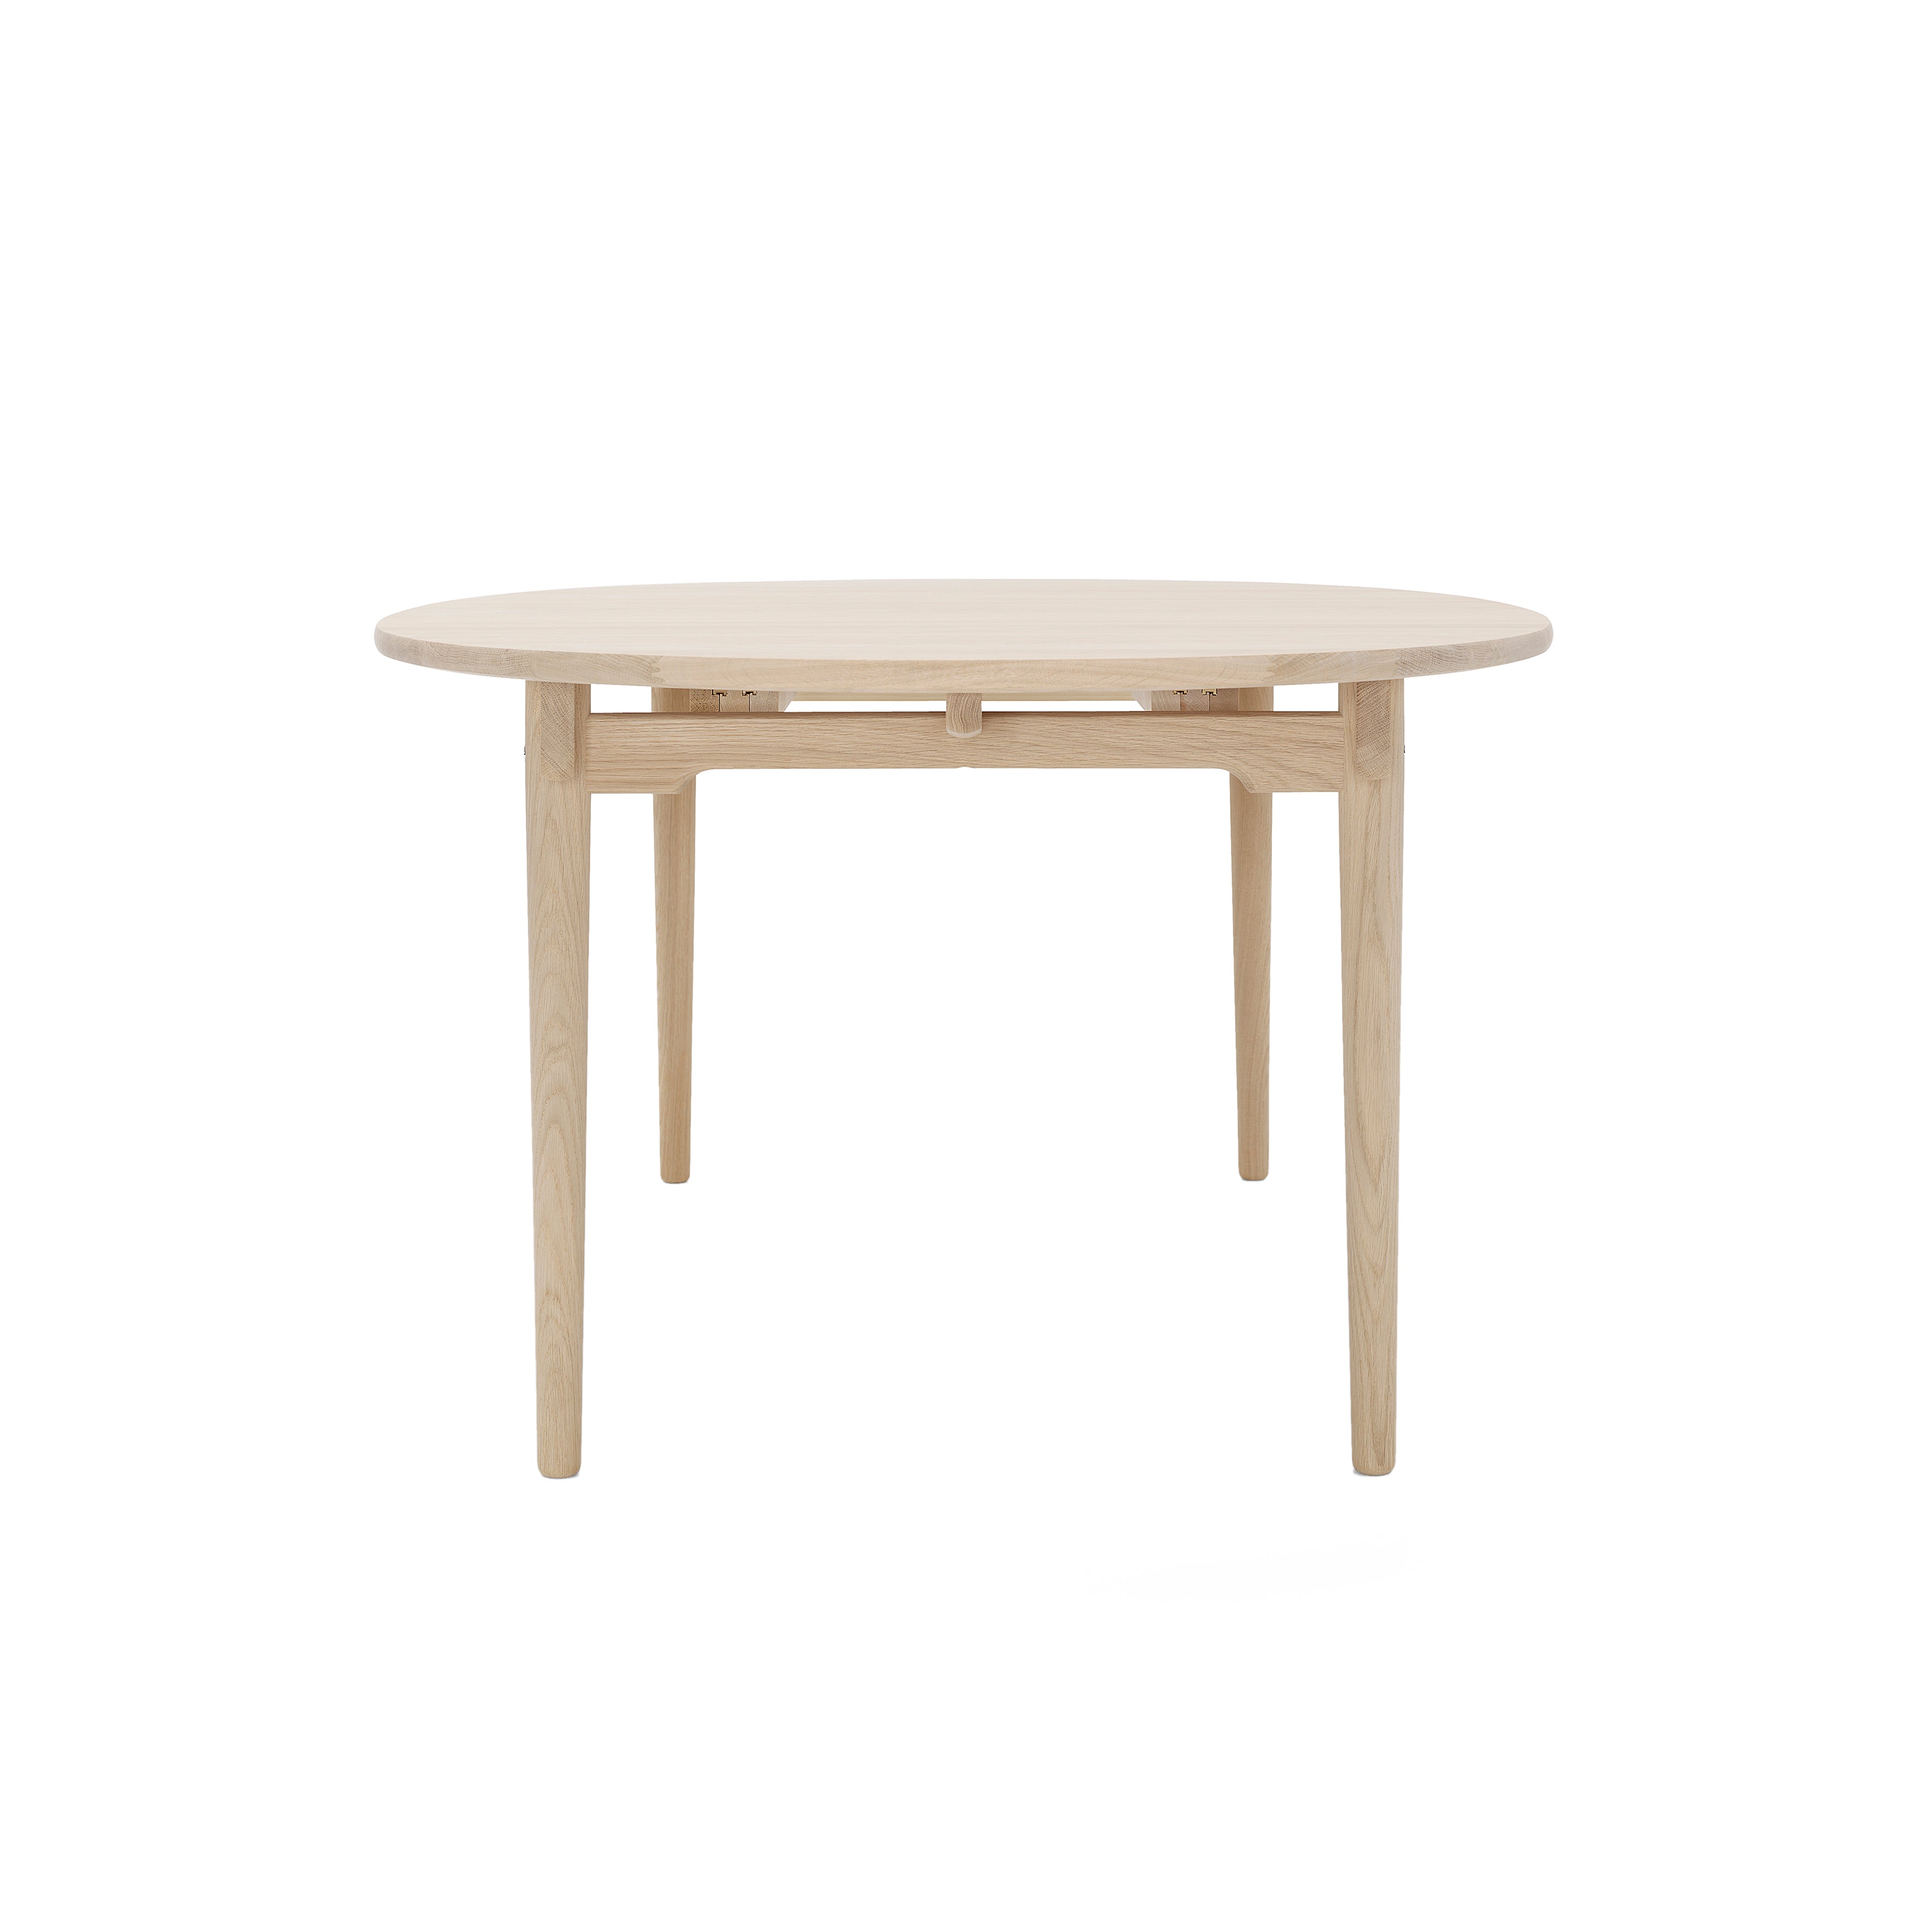 CH338 Dining Table: Soaped Oak